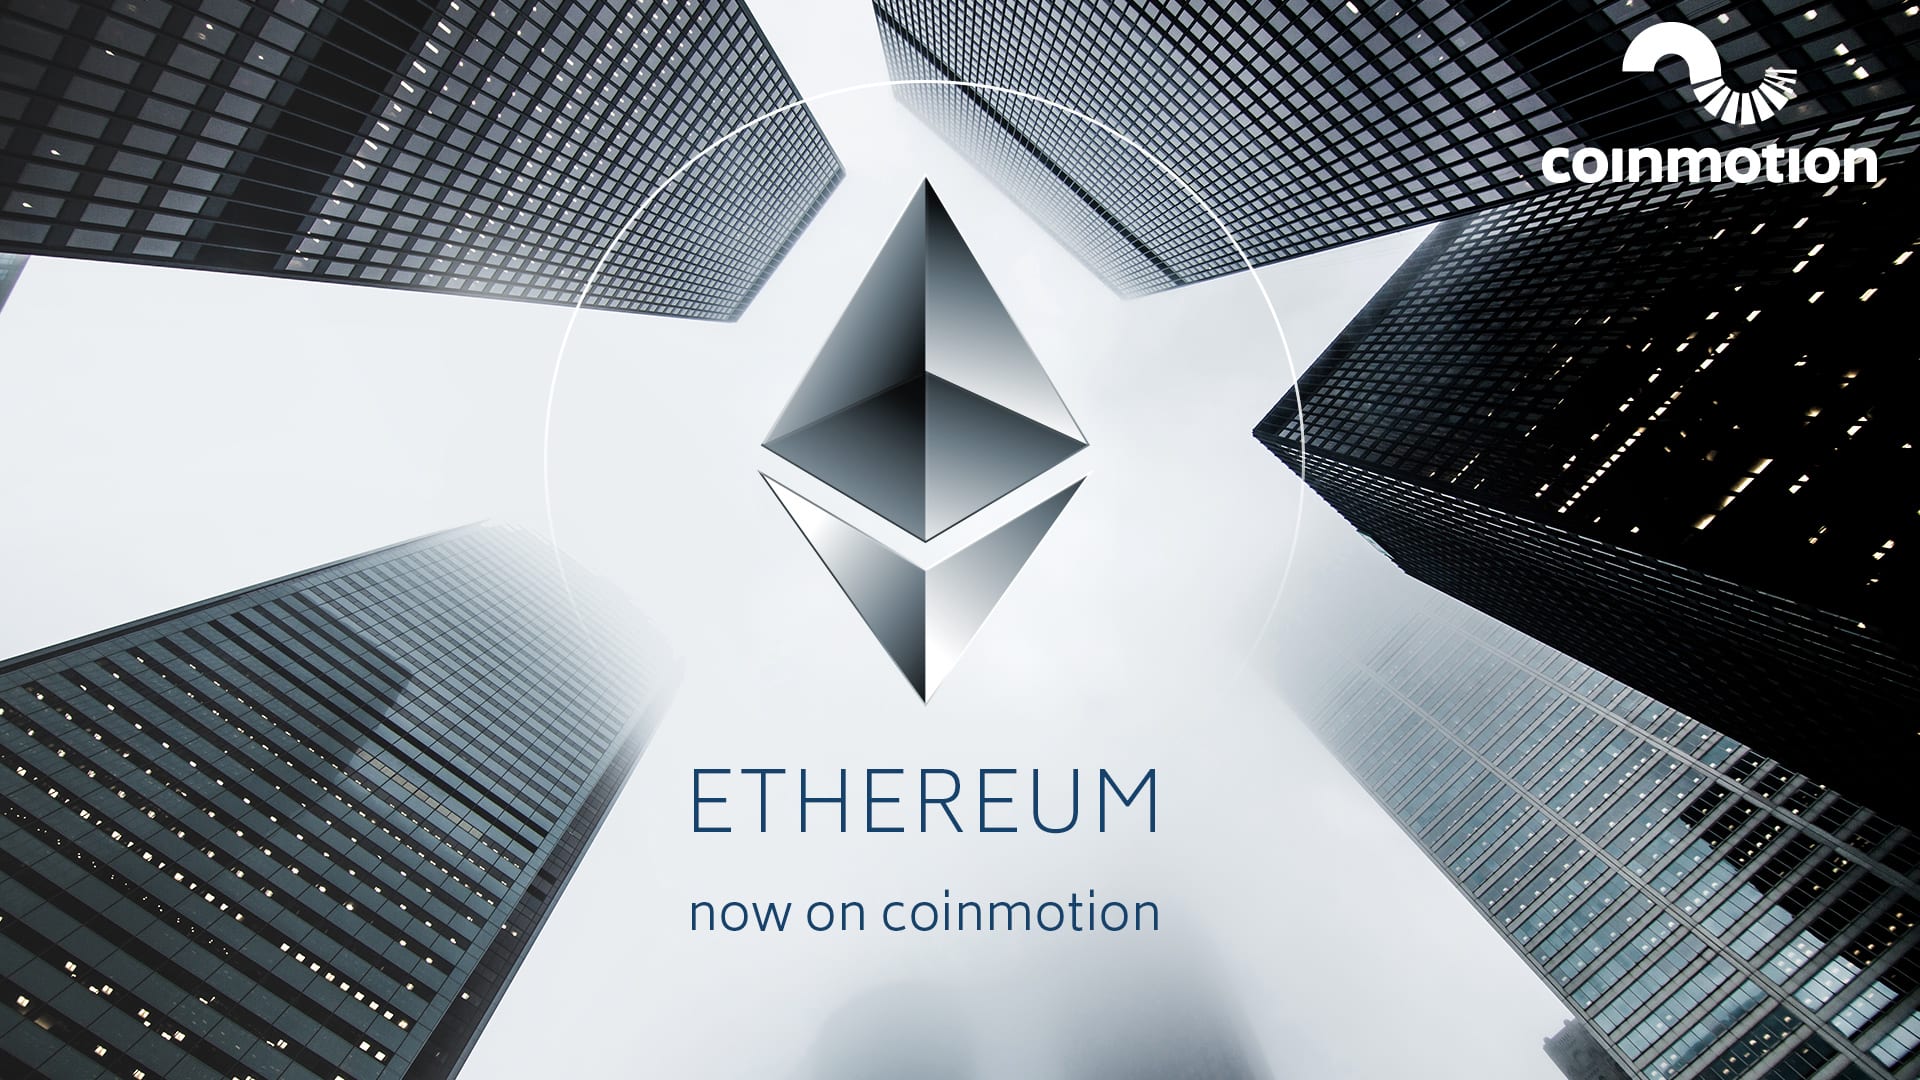 etheruim issueing crypto curenct